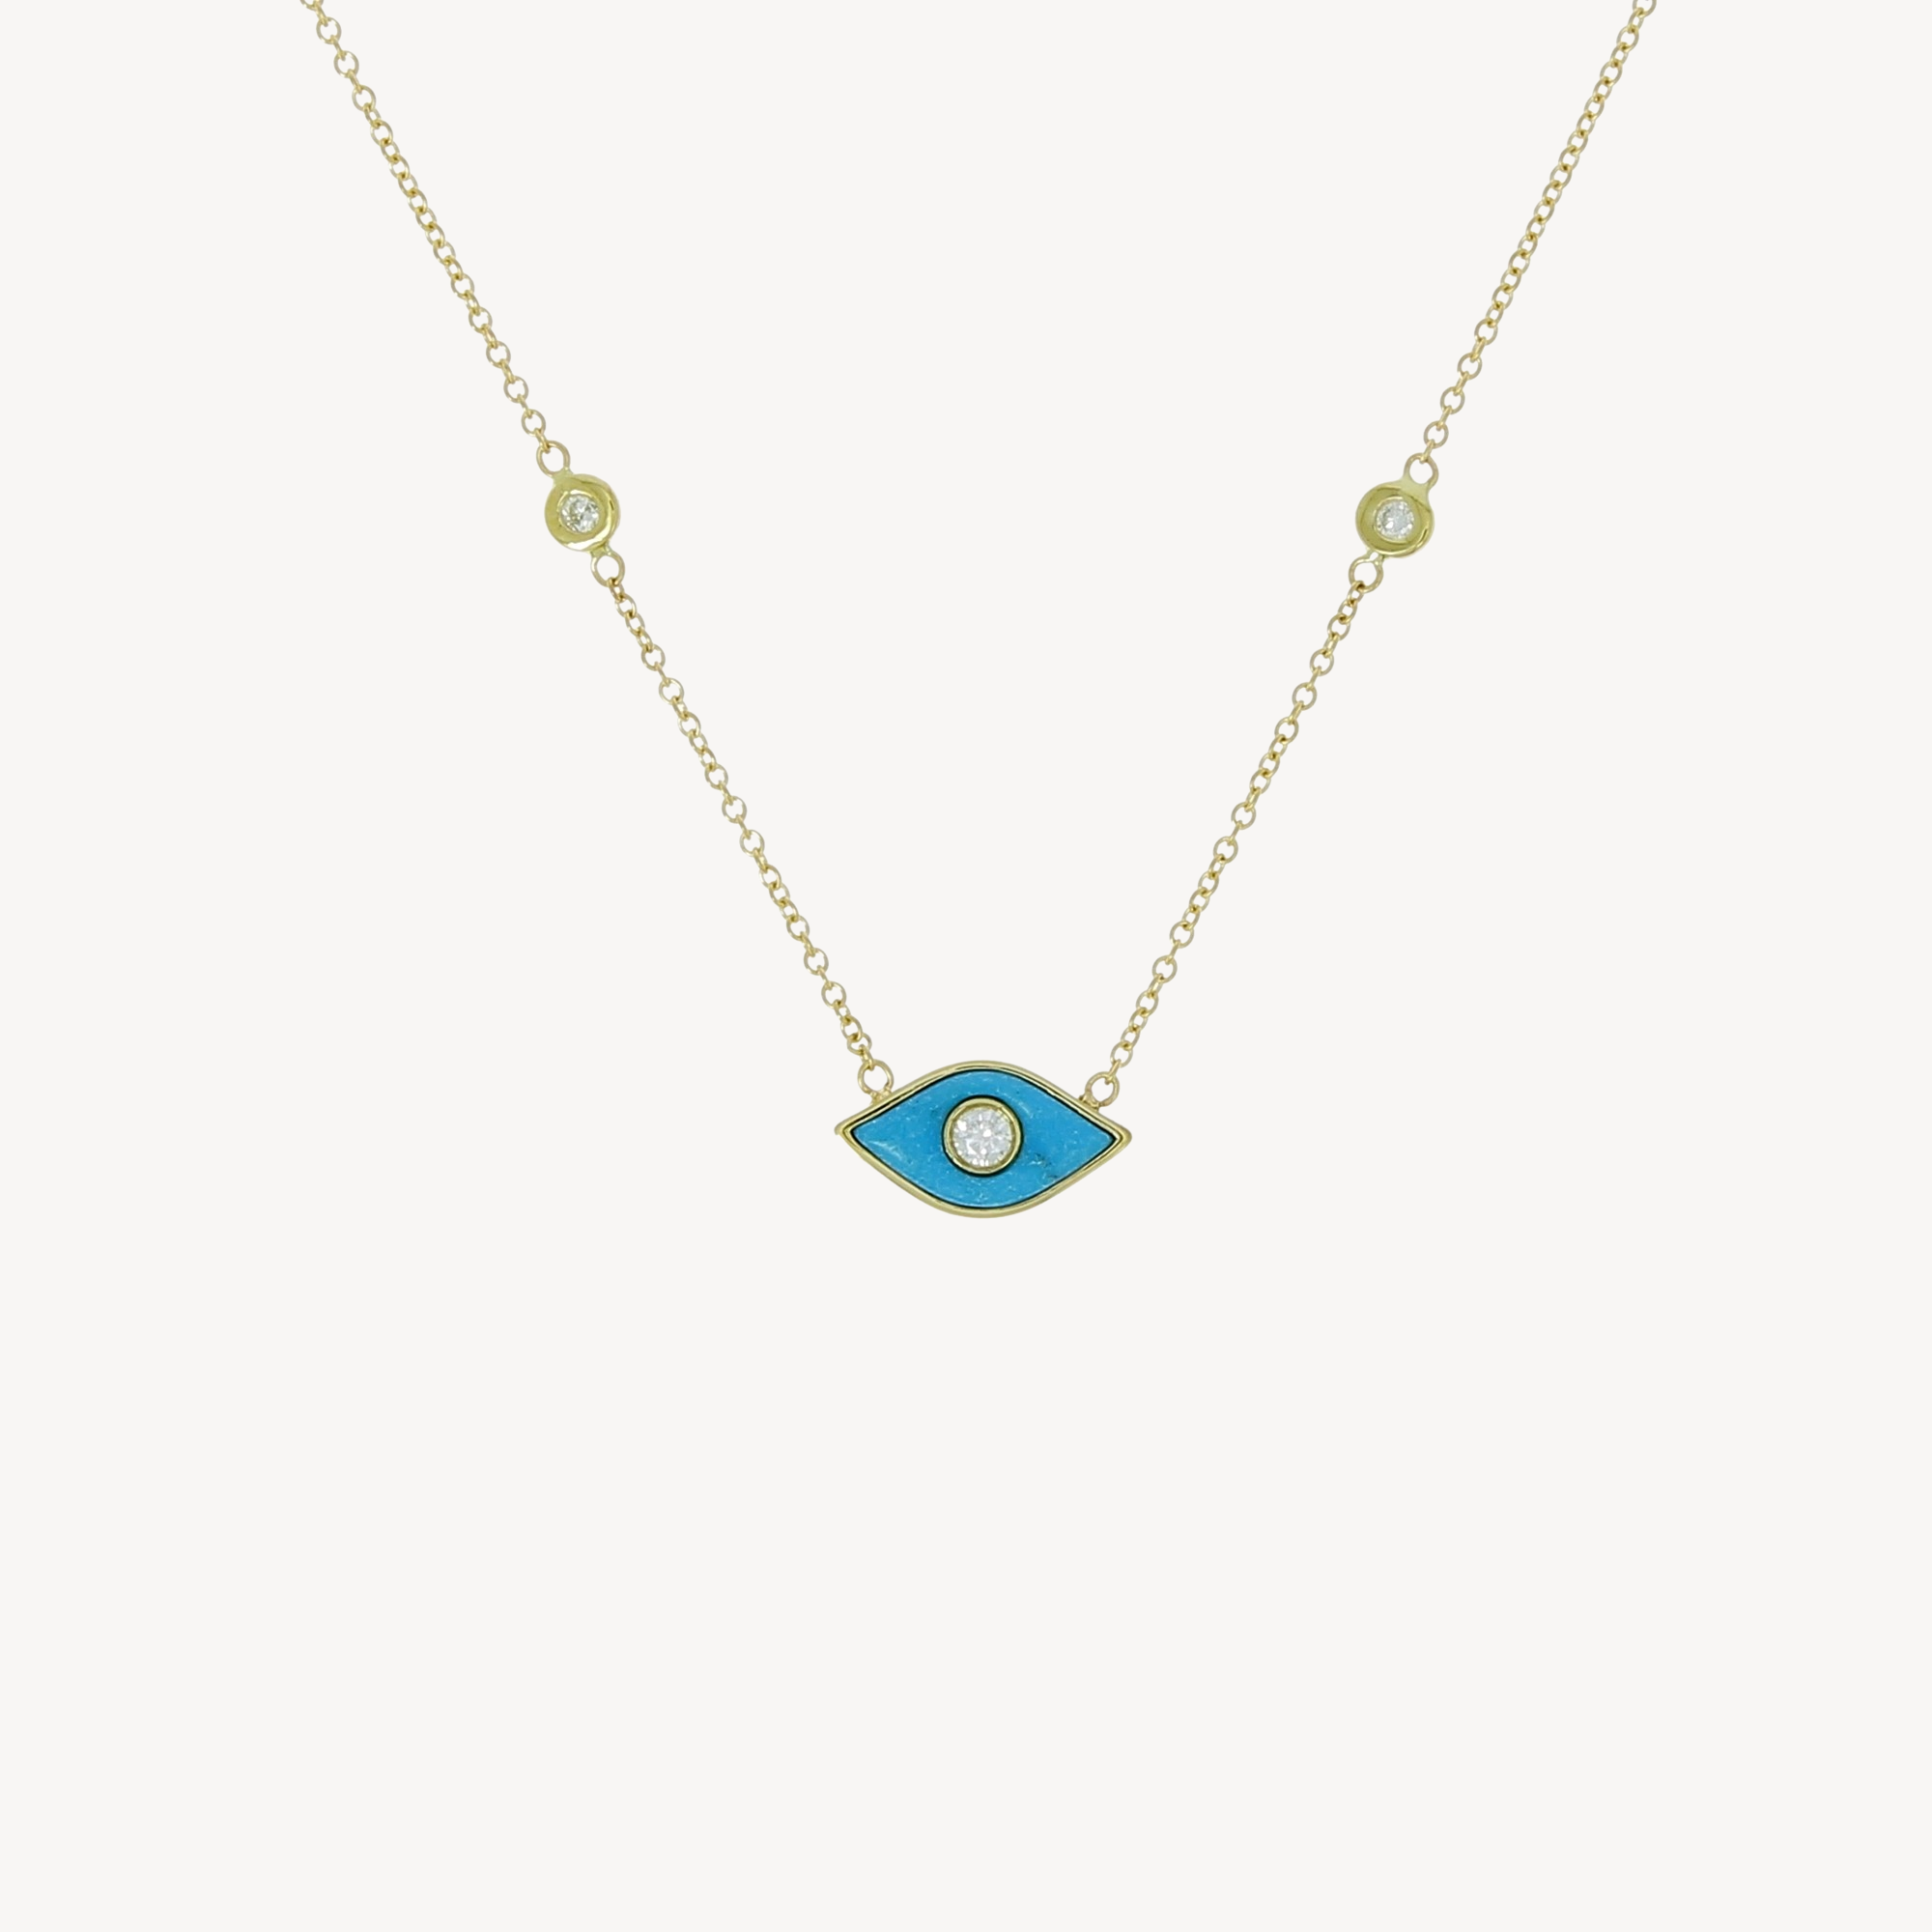 Yellow Gold Turquoise Eye Necklace